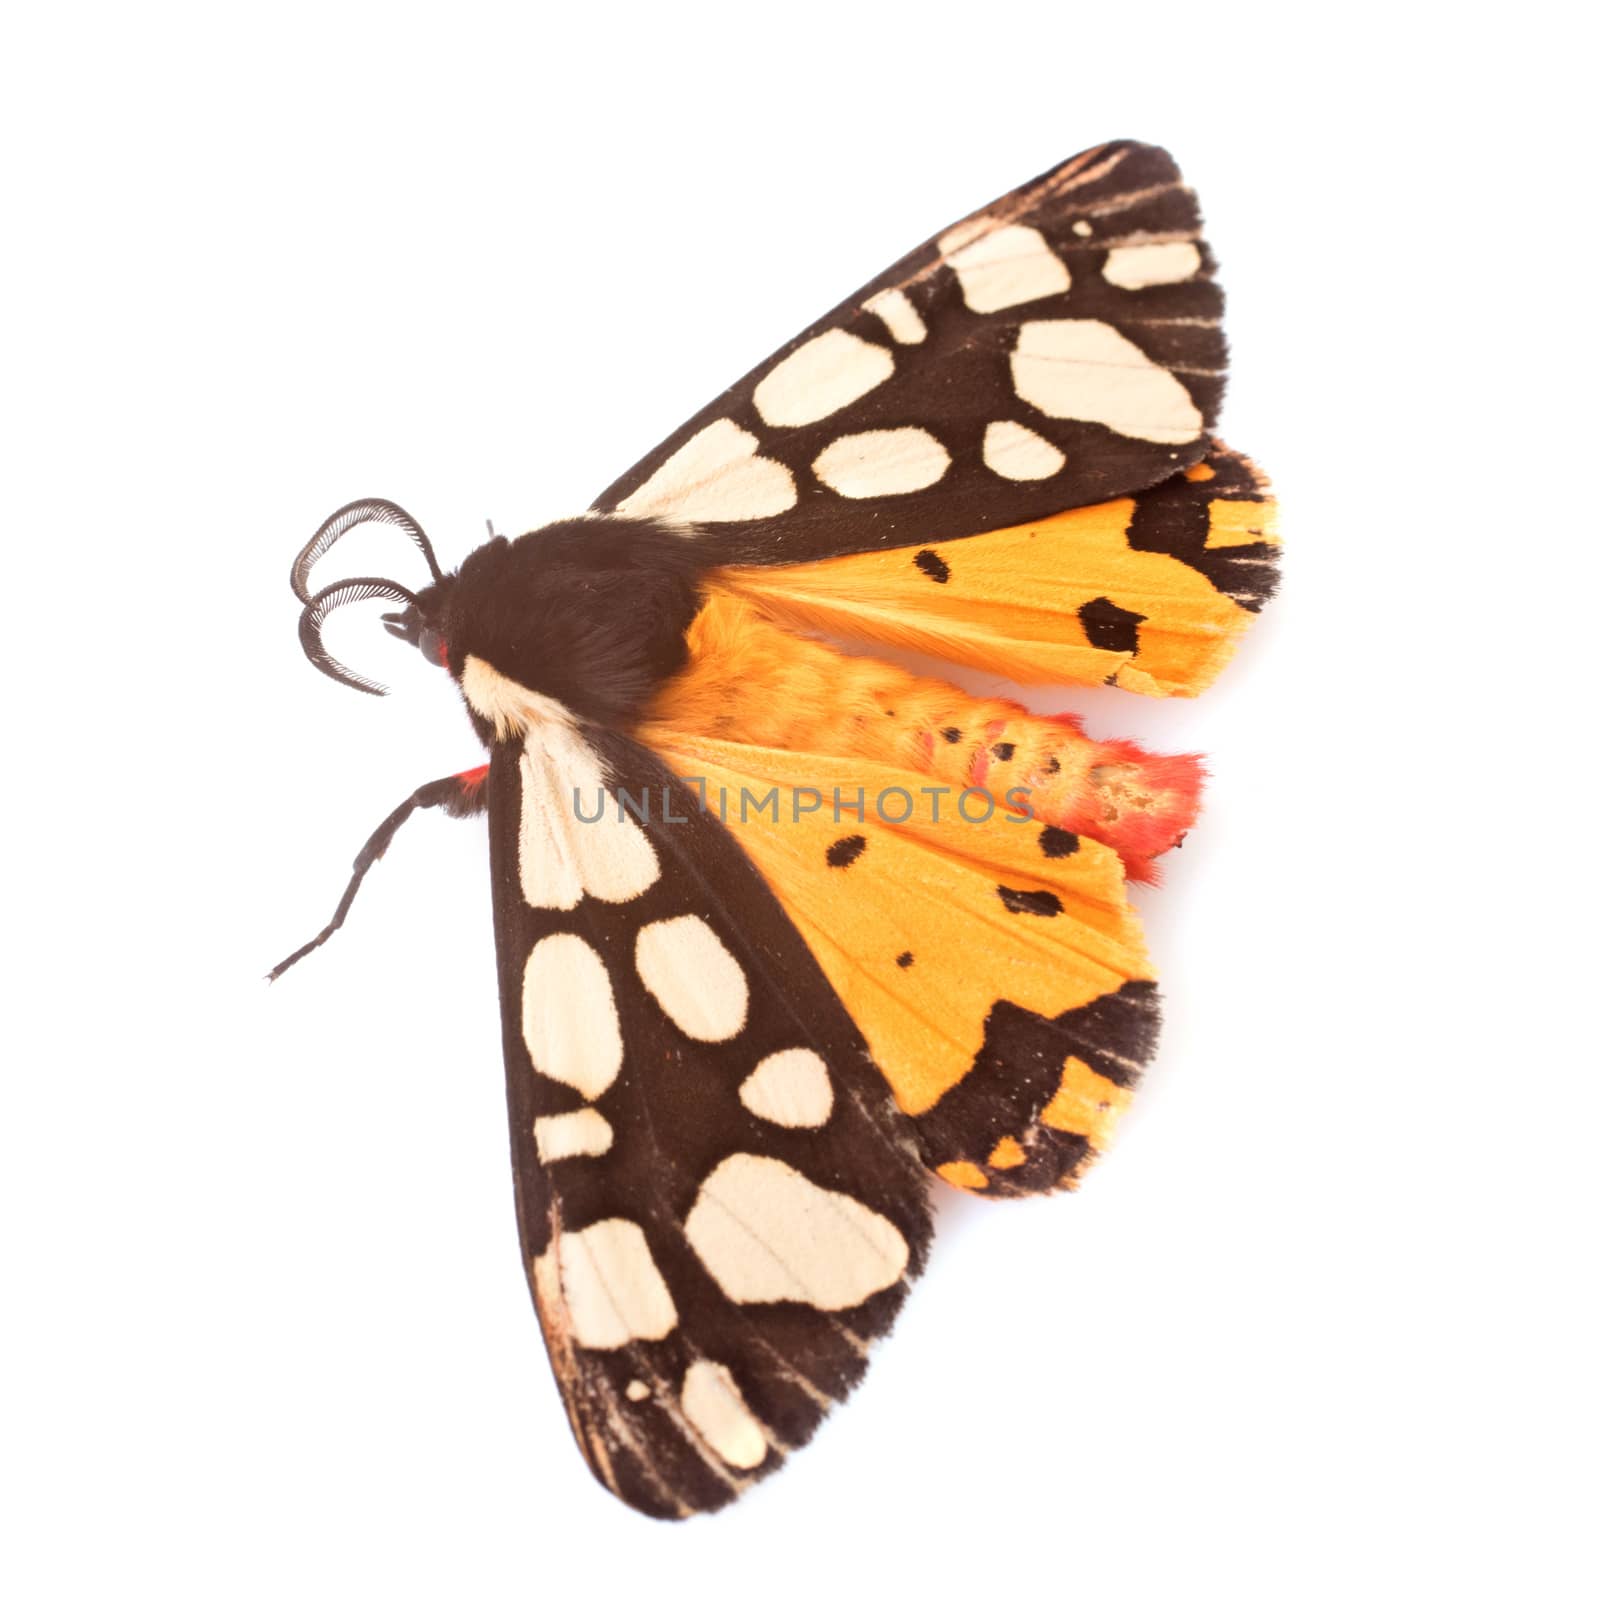 Epicallia villica butterfly in front of white background